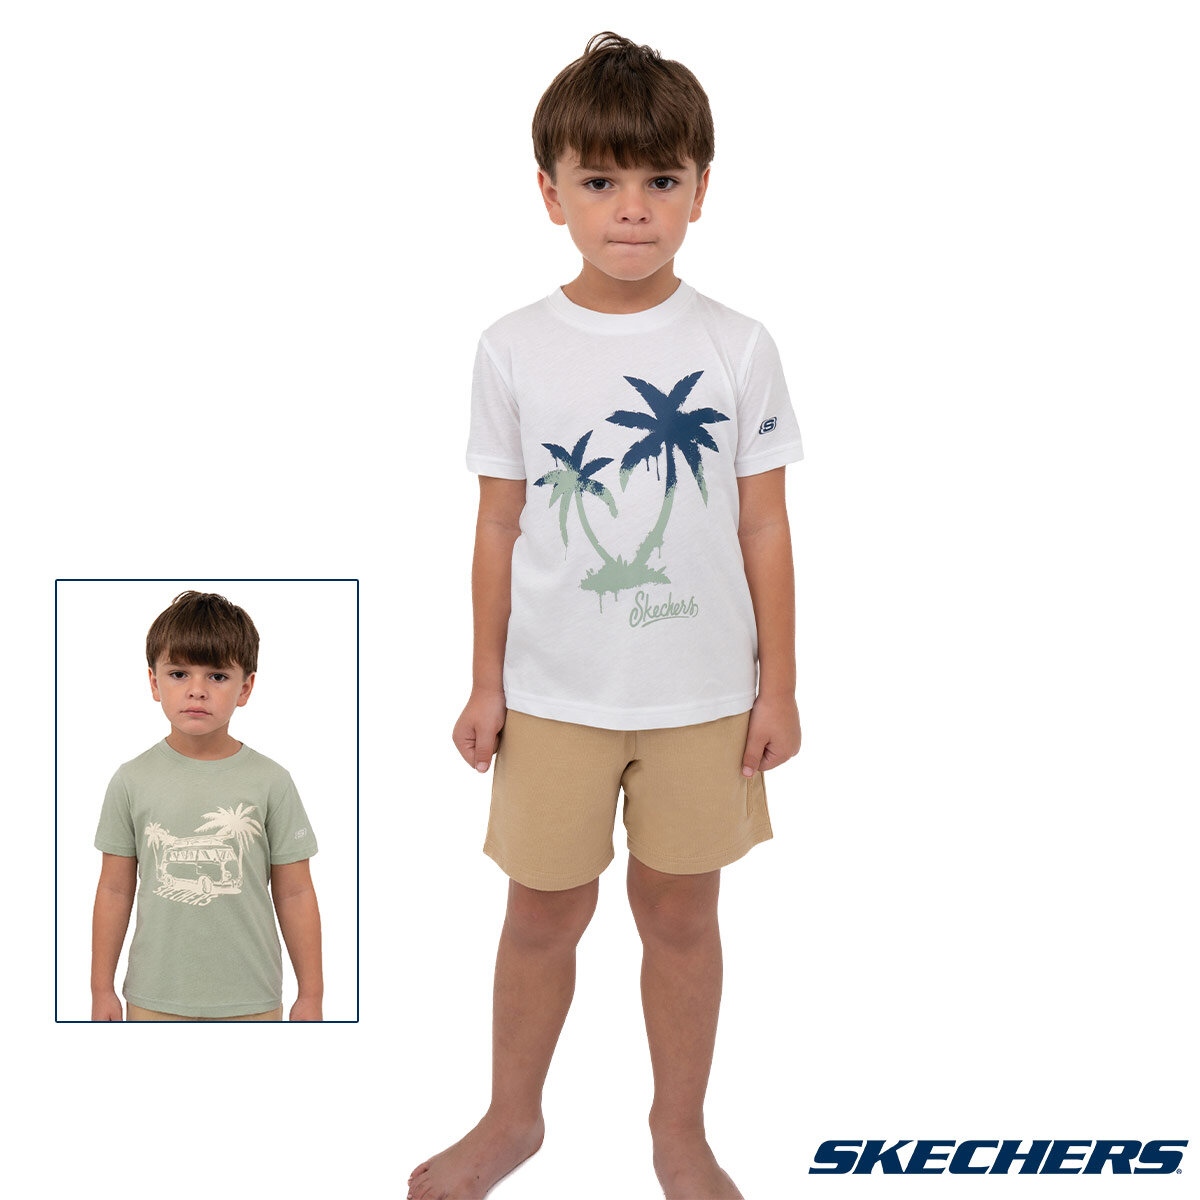 Skechers Kids 3 Piece Set with x2 T-Shirts and x1 Short in Sage & White